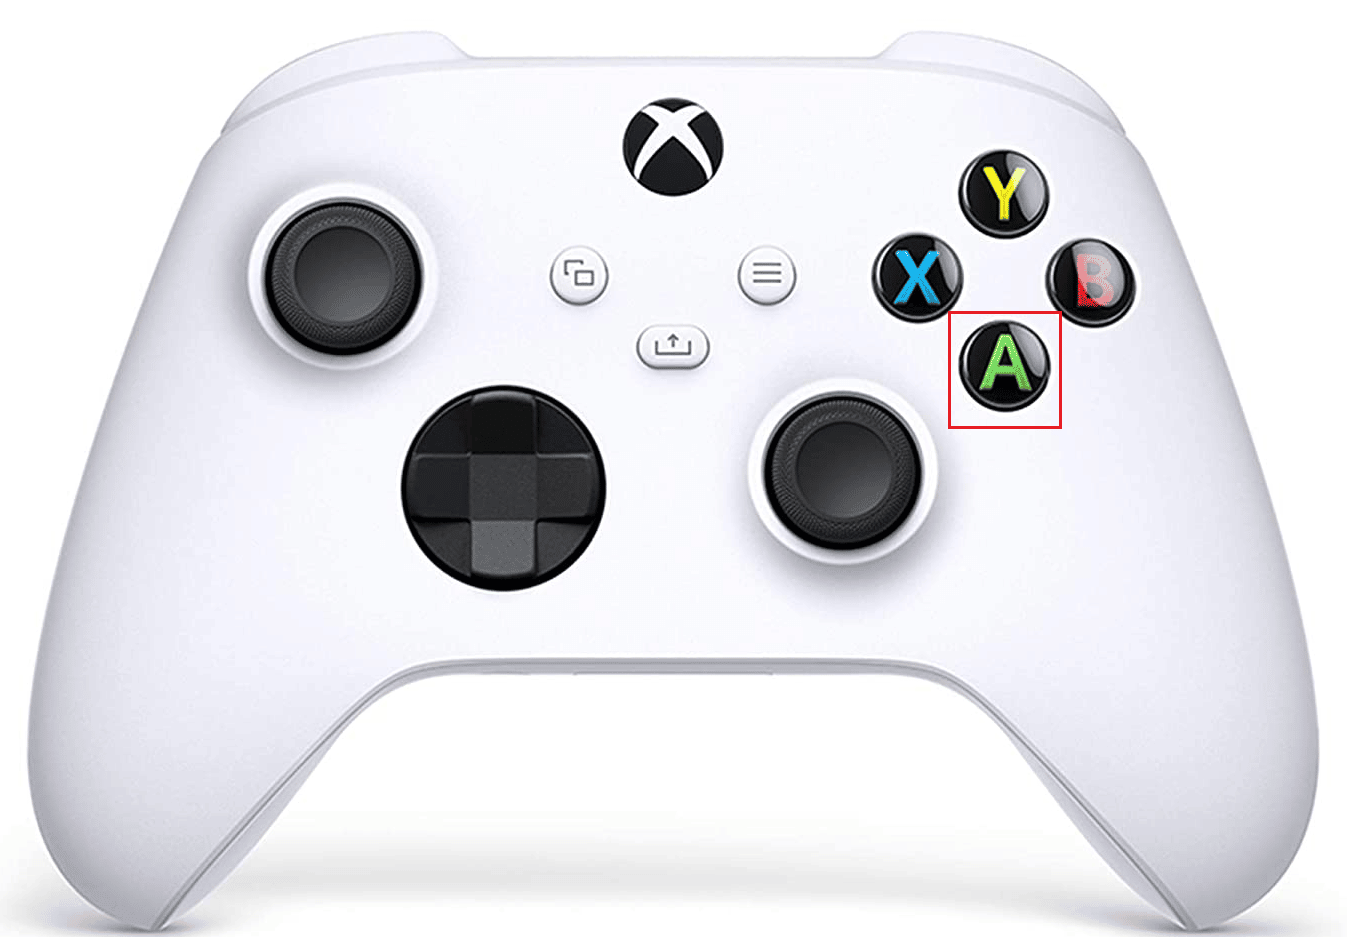 press the A button from the Xbox controller to toggle to the SITTING OUT status